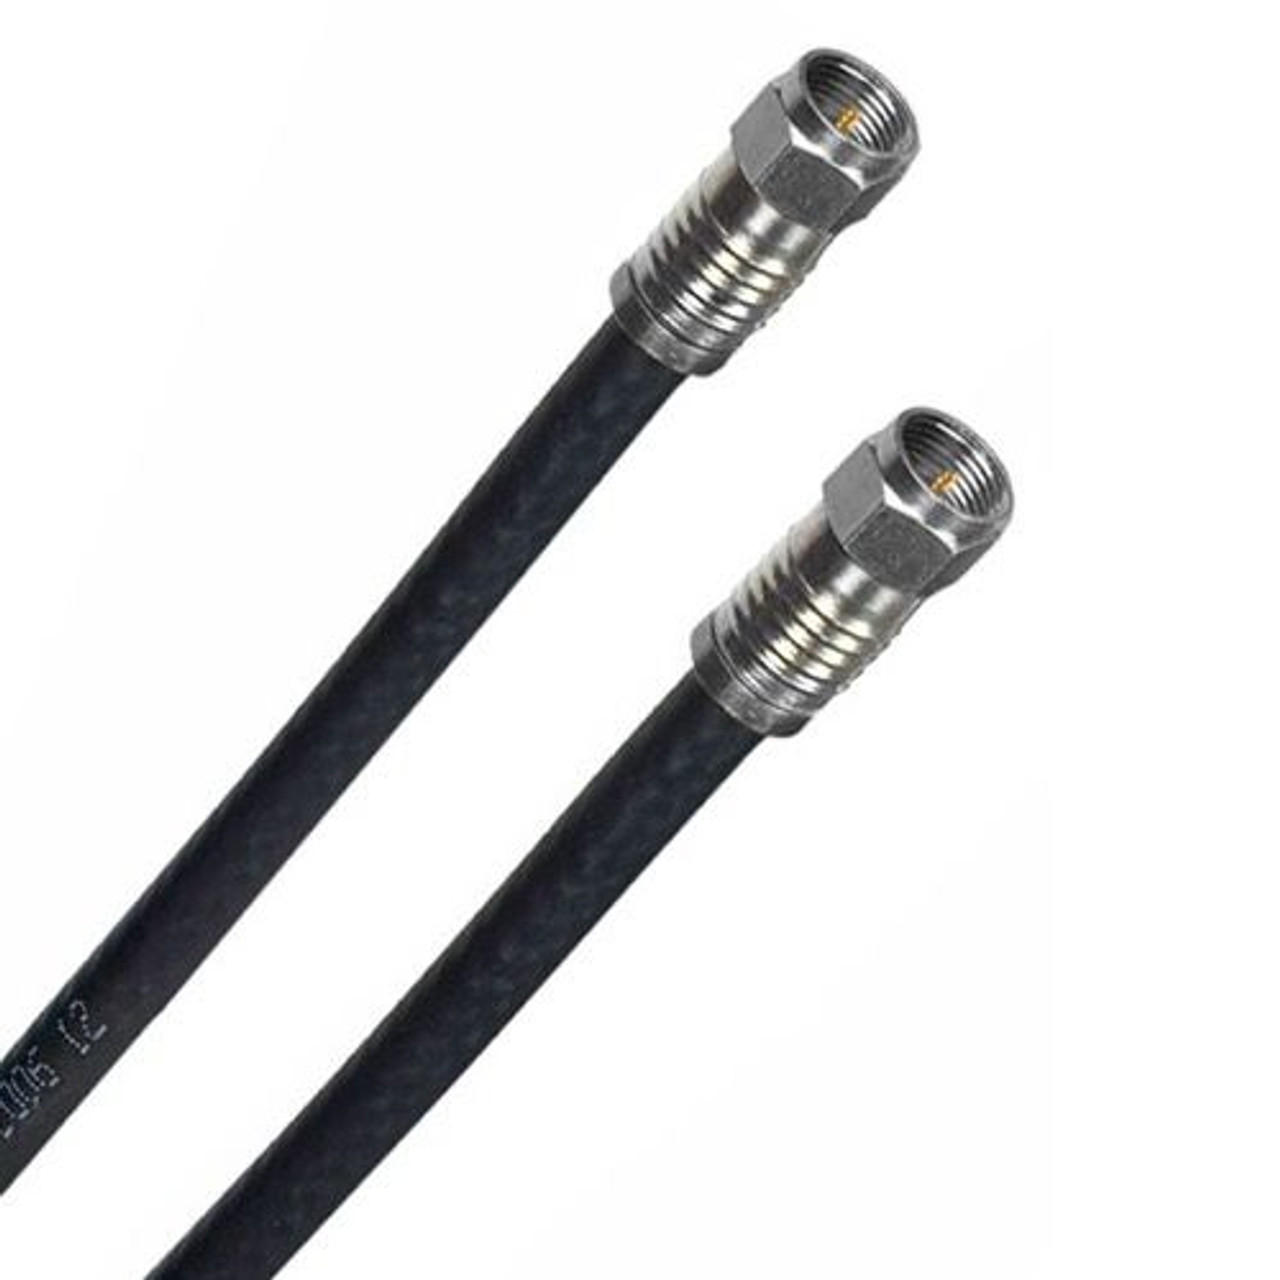 Summit 100' FT RG6 Coaxial Cable Compression F Black with F Connector On Each End Dual Shielded 75 Ohm Video CATV Antenna Signal Distribution Cable Braided RG-6 Satellite Dish Off-Air TV Aerial